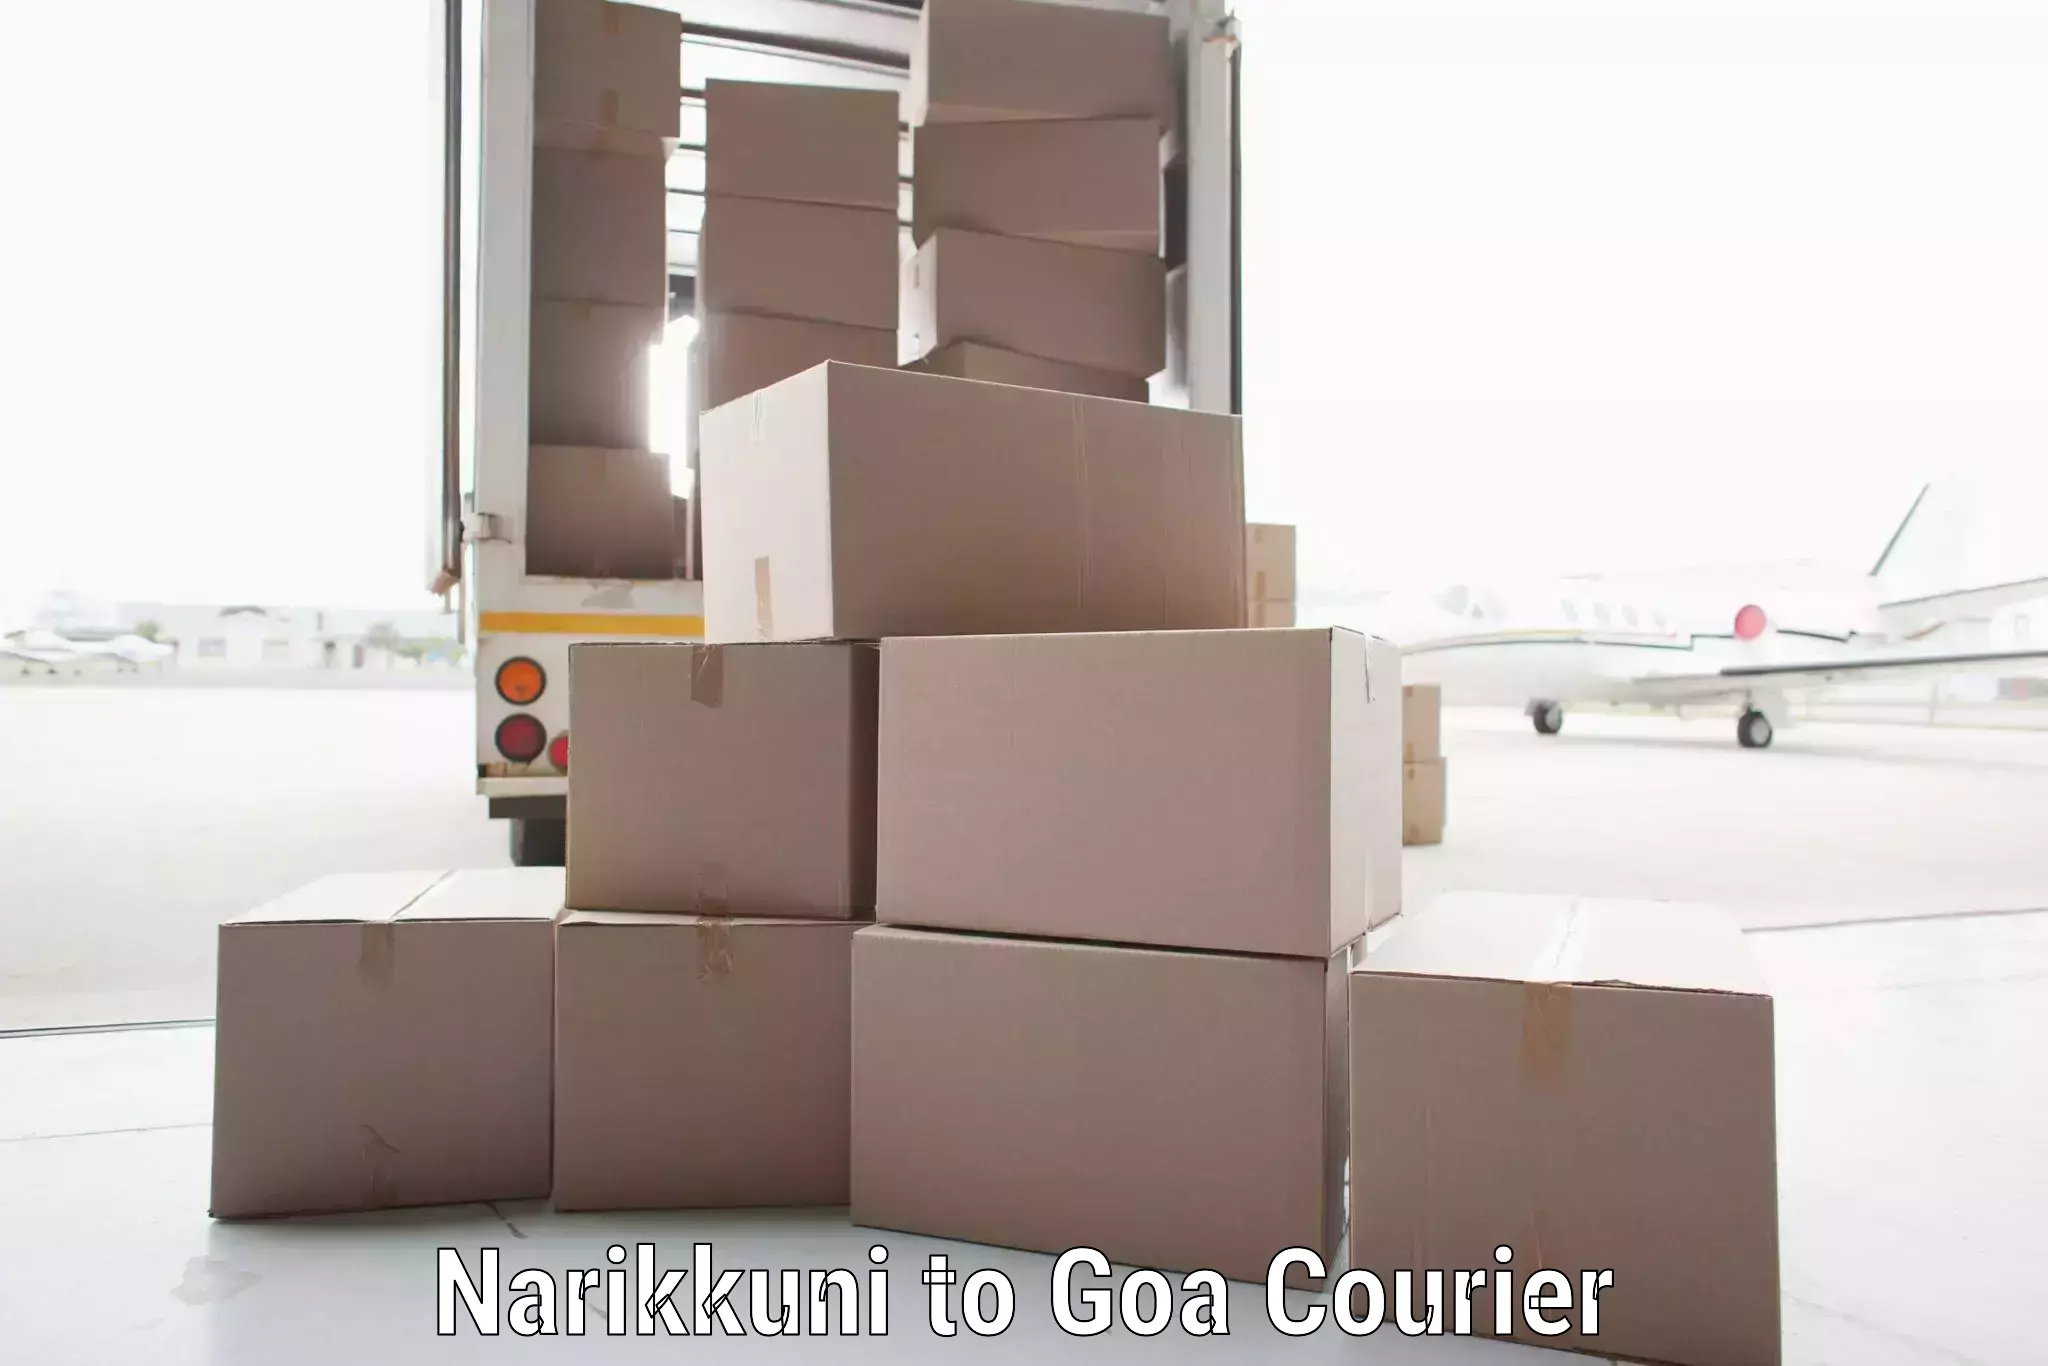 Nationwide delivery network in Narikkuni to Panjim